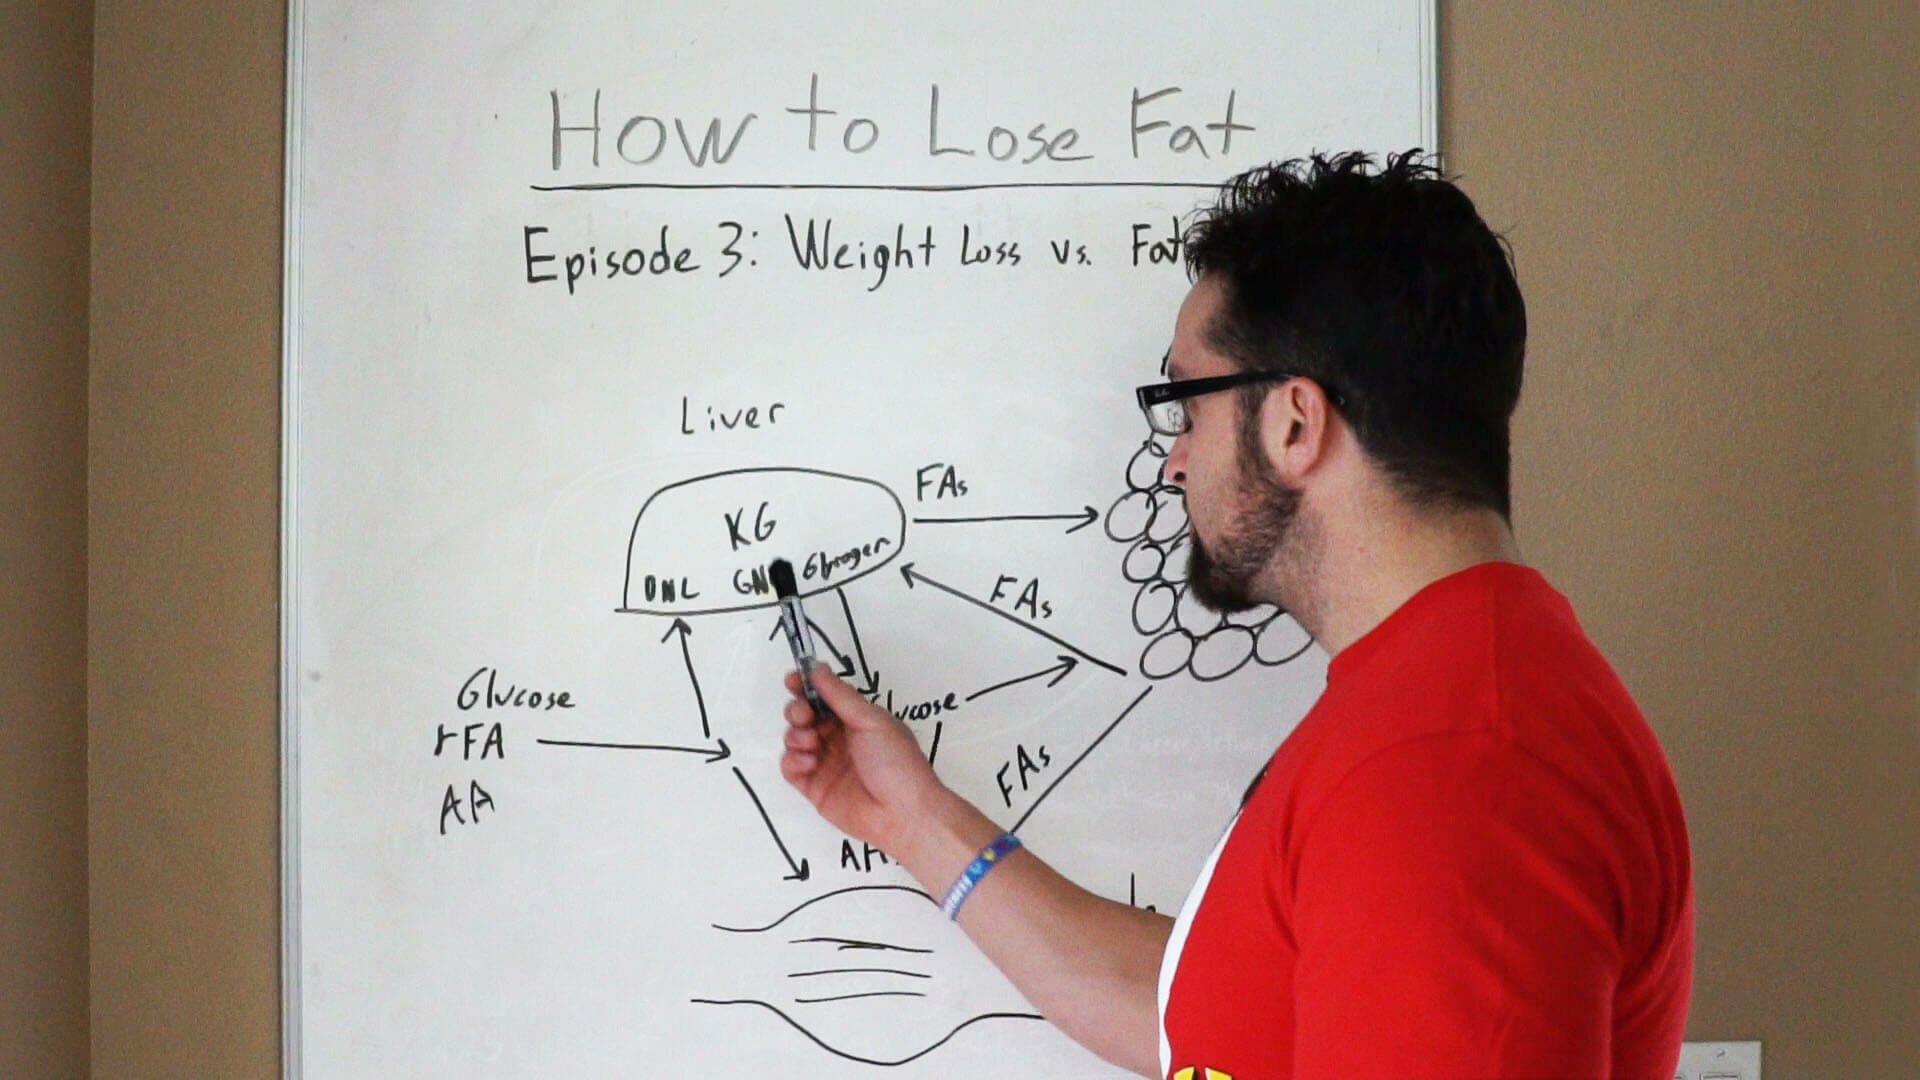 How Fat Loss Works - Episode 3: Weight Loss vs. Fat Loss